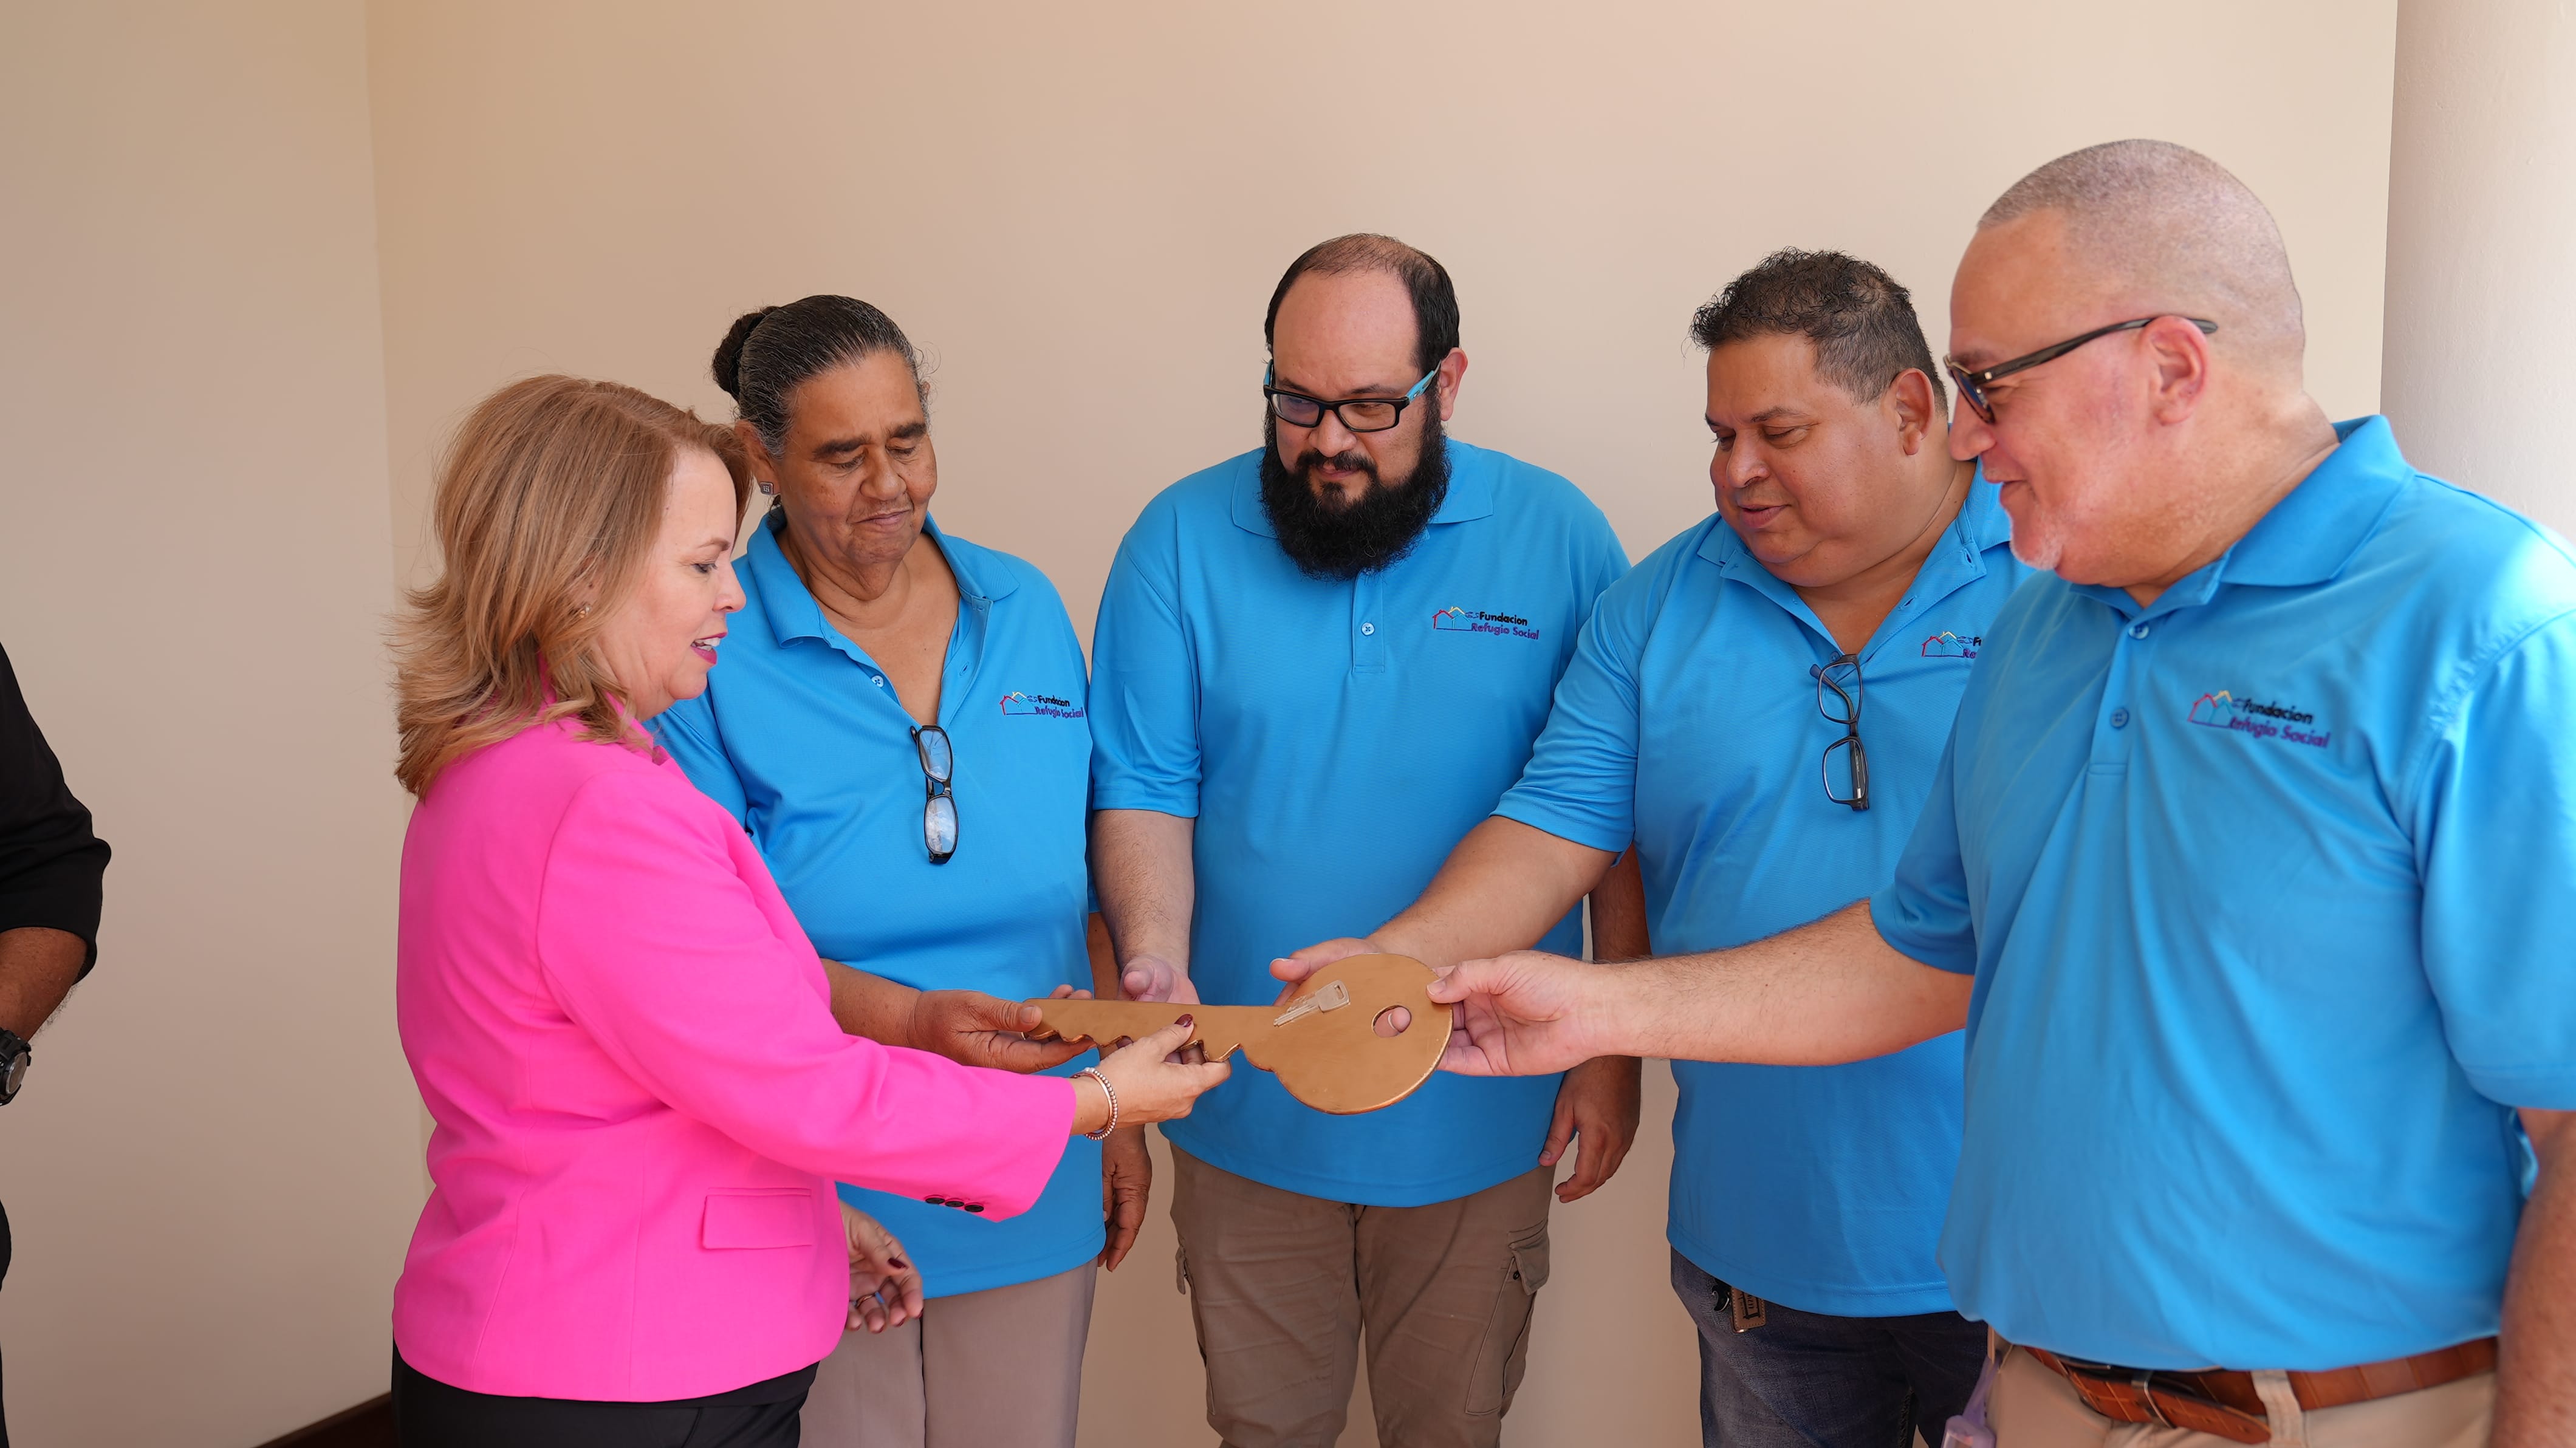 Prome Minister Evelyn Wever-Croes contento cu awor Aruba tin un shelter pa hende homber